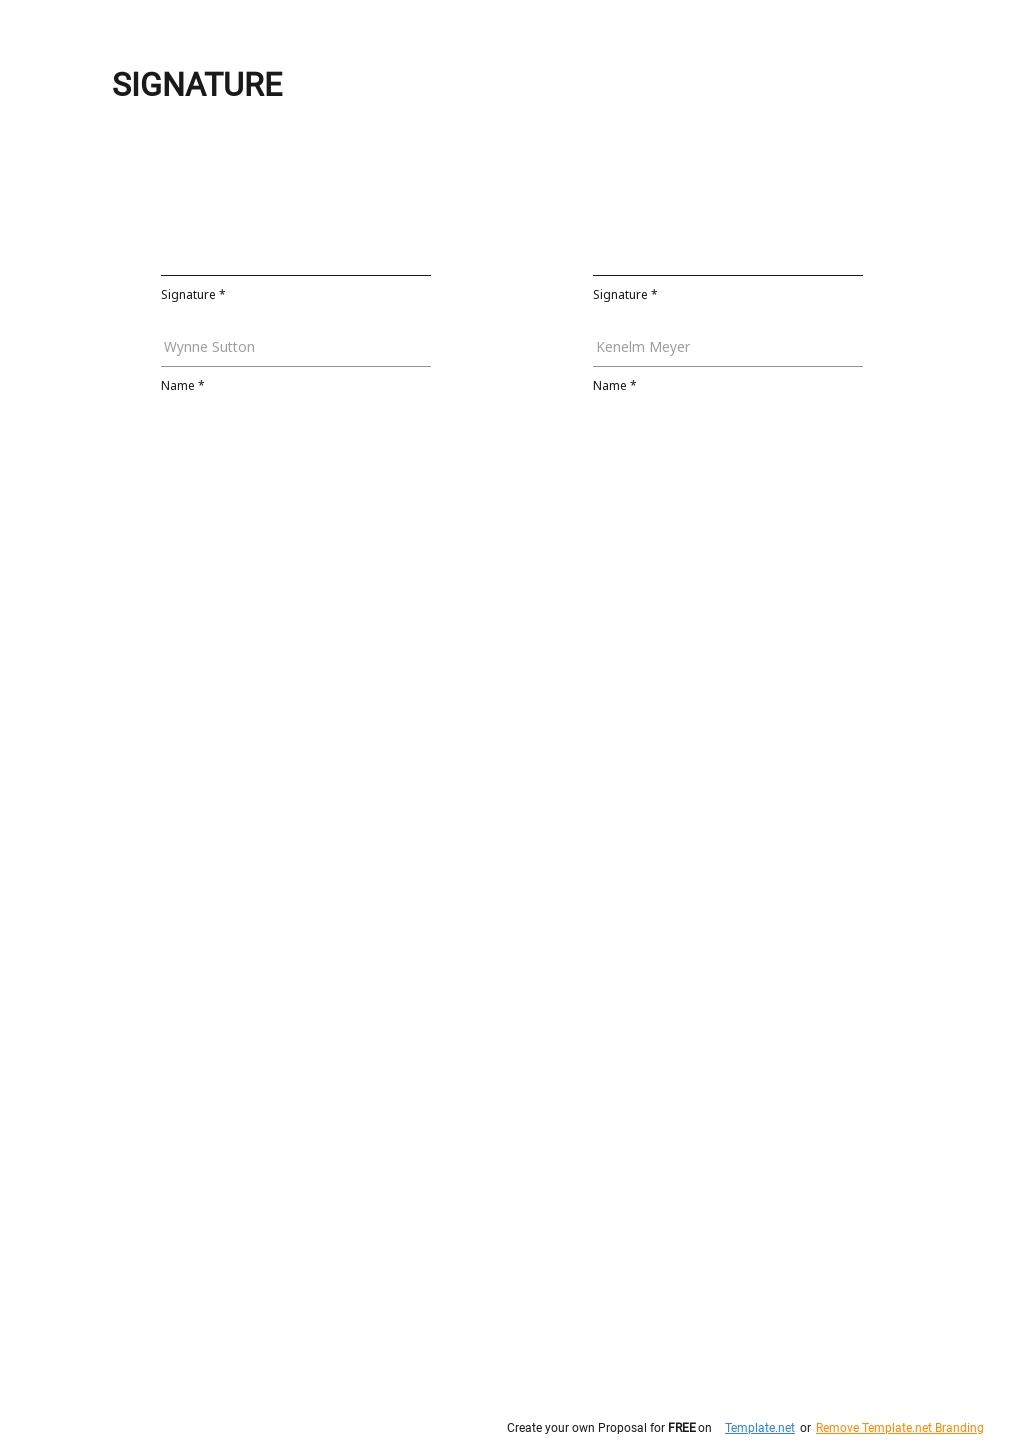 Sample Property Sales Agency Agreement Template 2.jpe